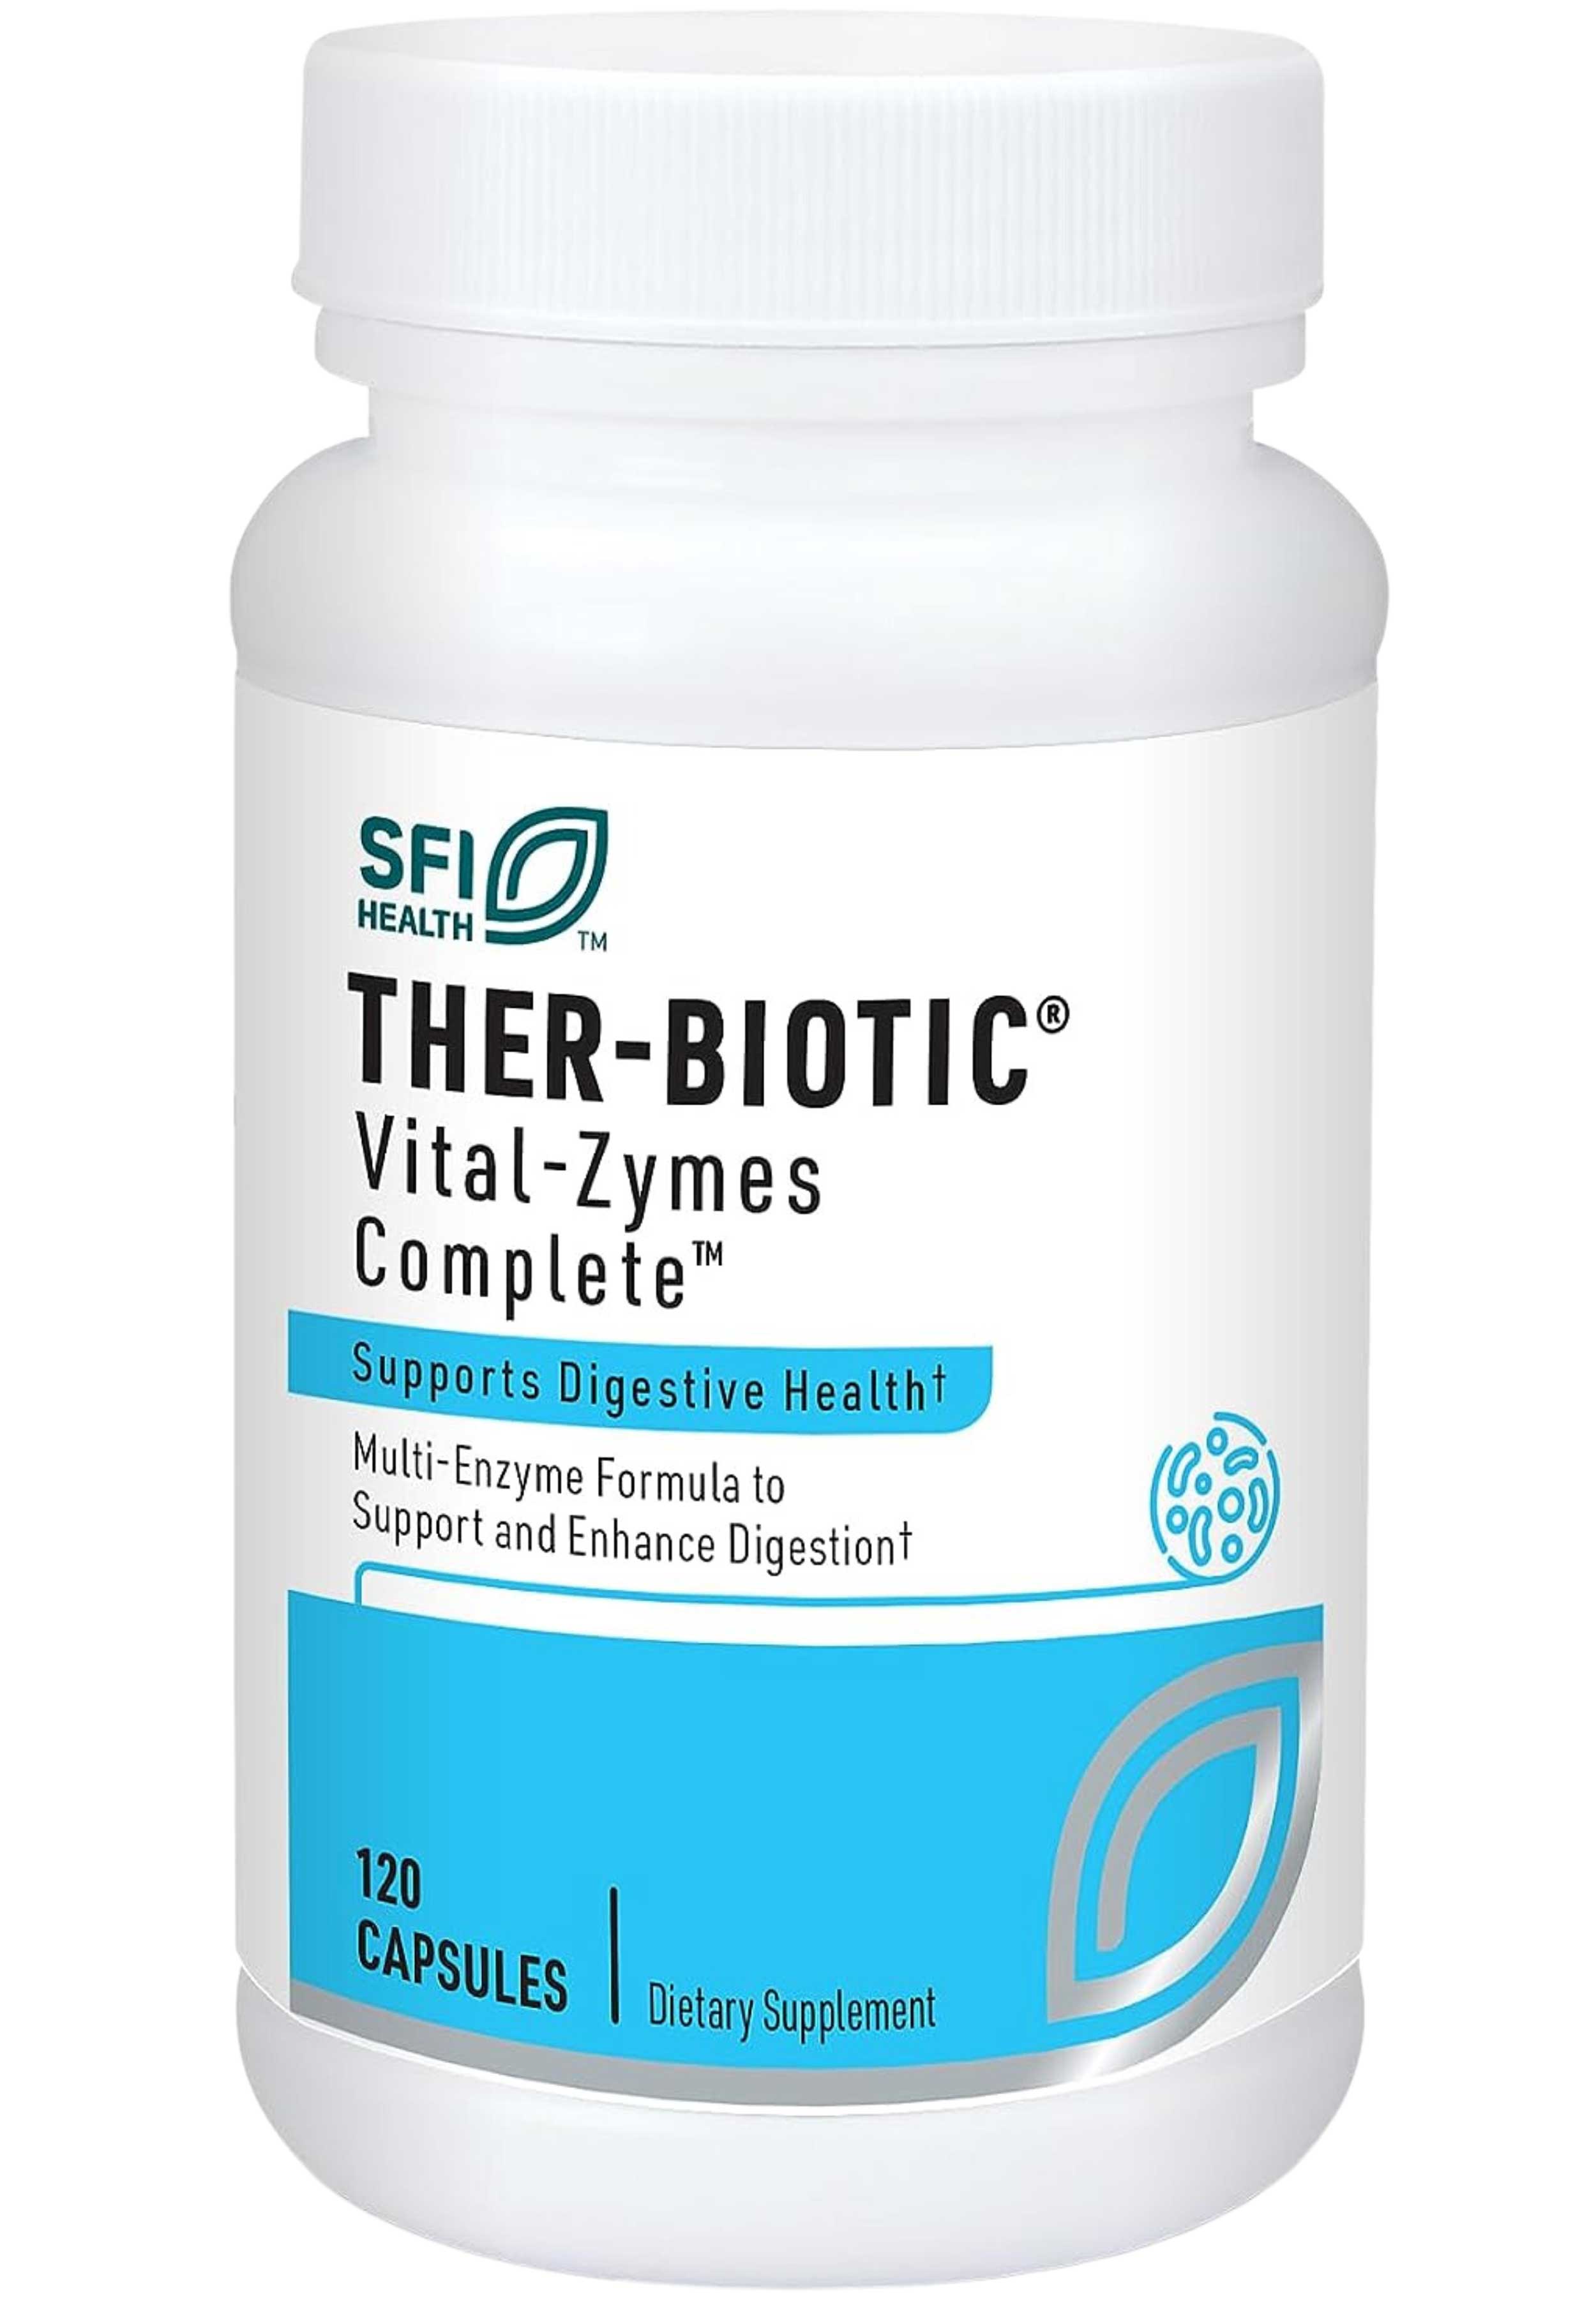 Klaire Labs Ther-Biotic Vital-Zymes Complete